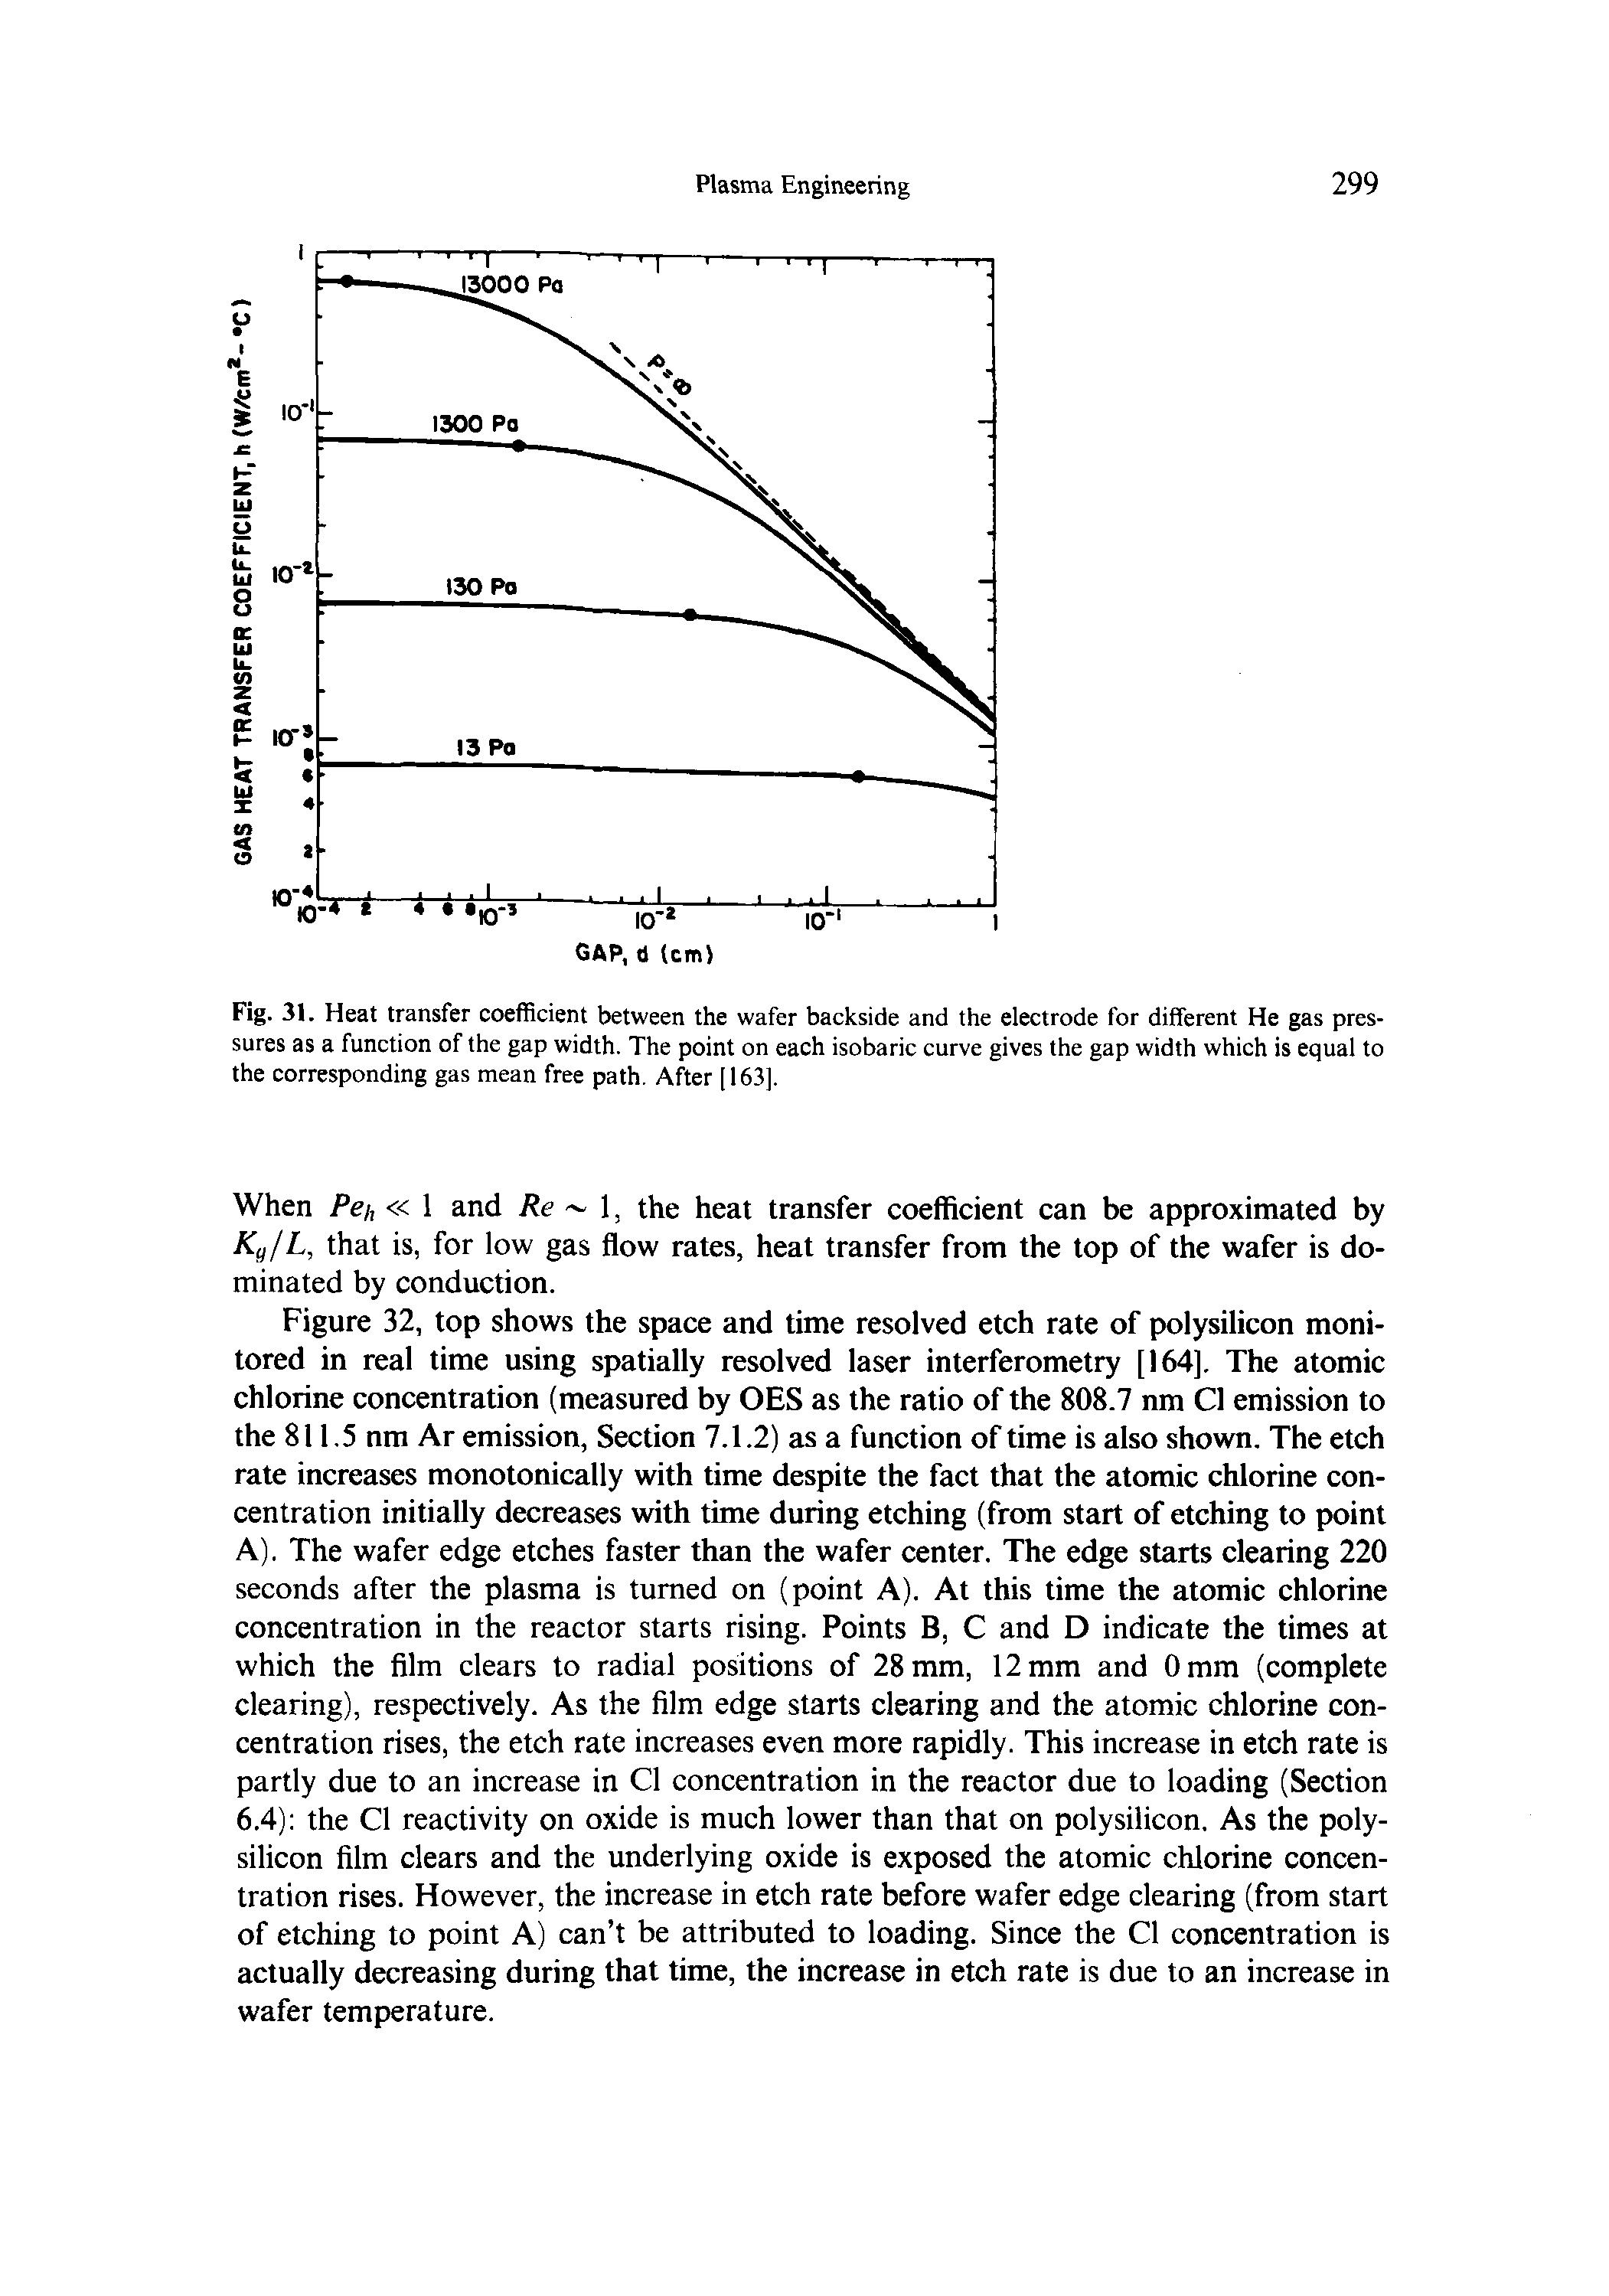 Fig. 31. Heat transfer coefficient between the wafer backside and the electrode for different He gas pressures as a function of the gap width. The point on each isobaric curve gives the gap width which is equal to the corresponding gas mean free path. After [163].